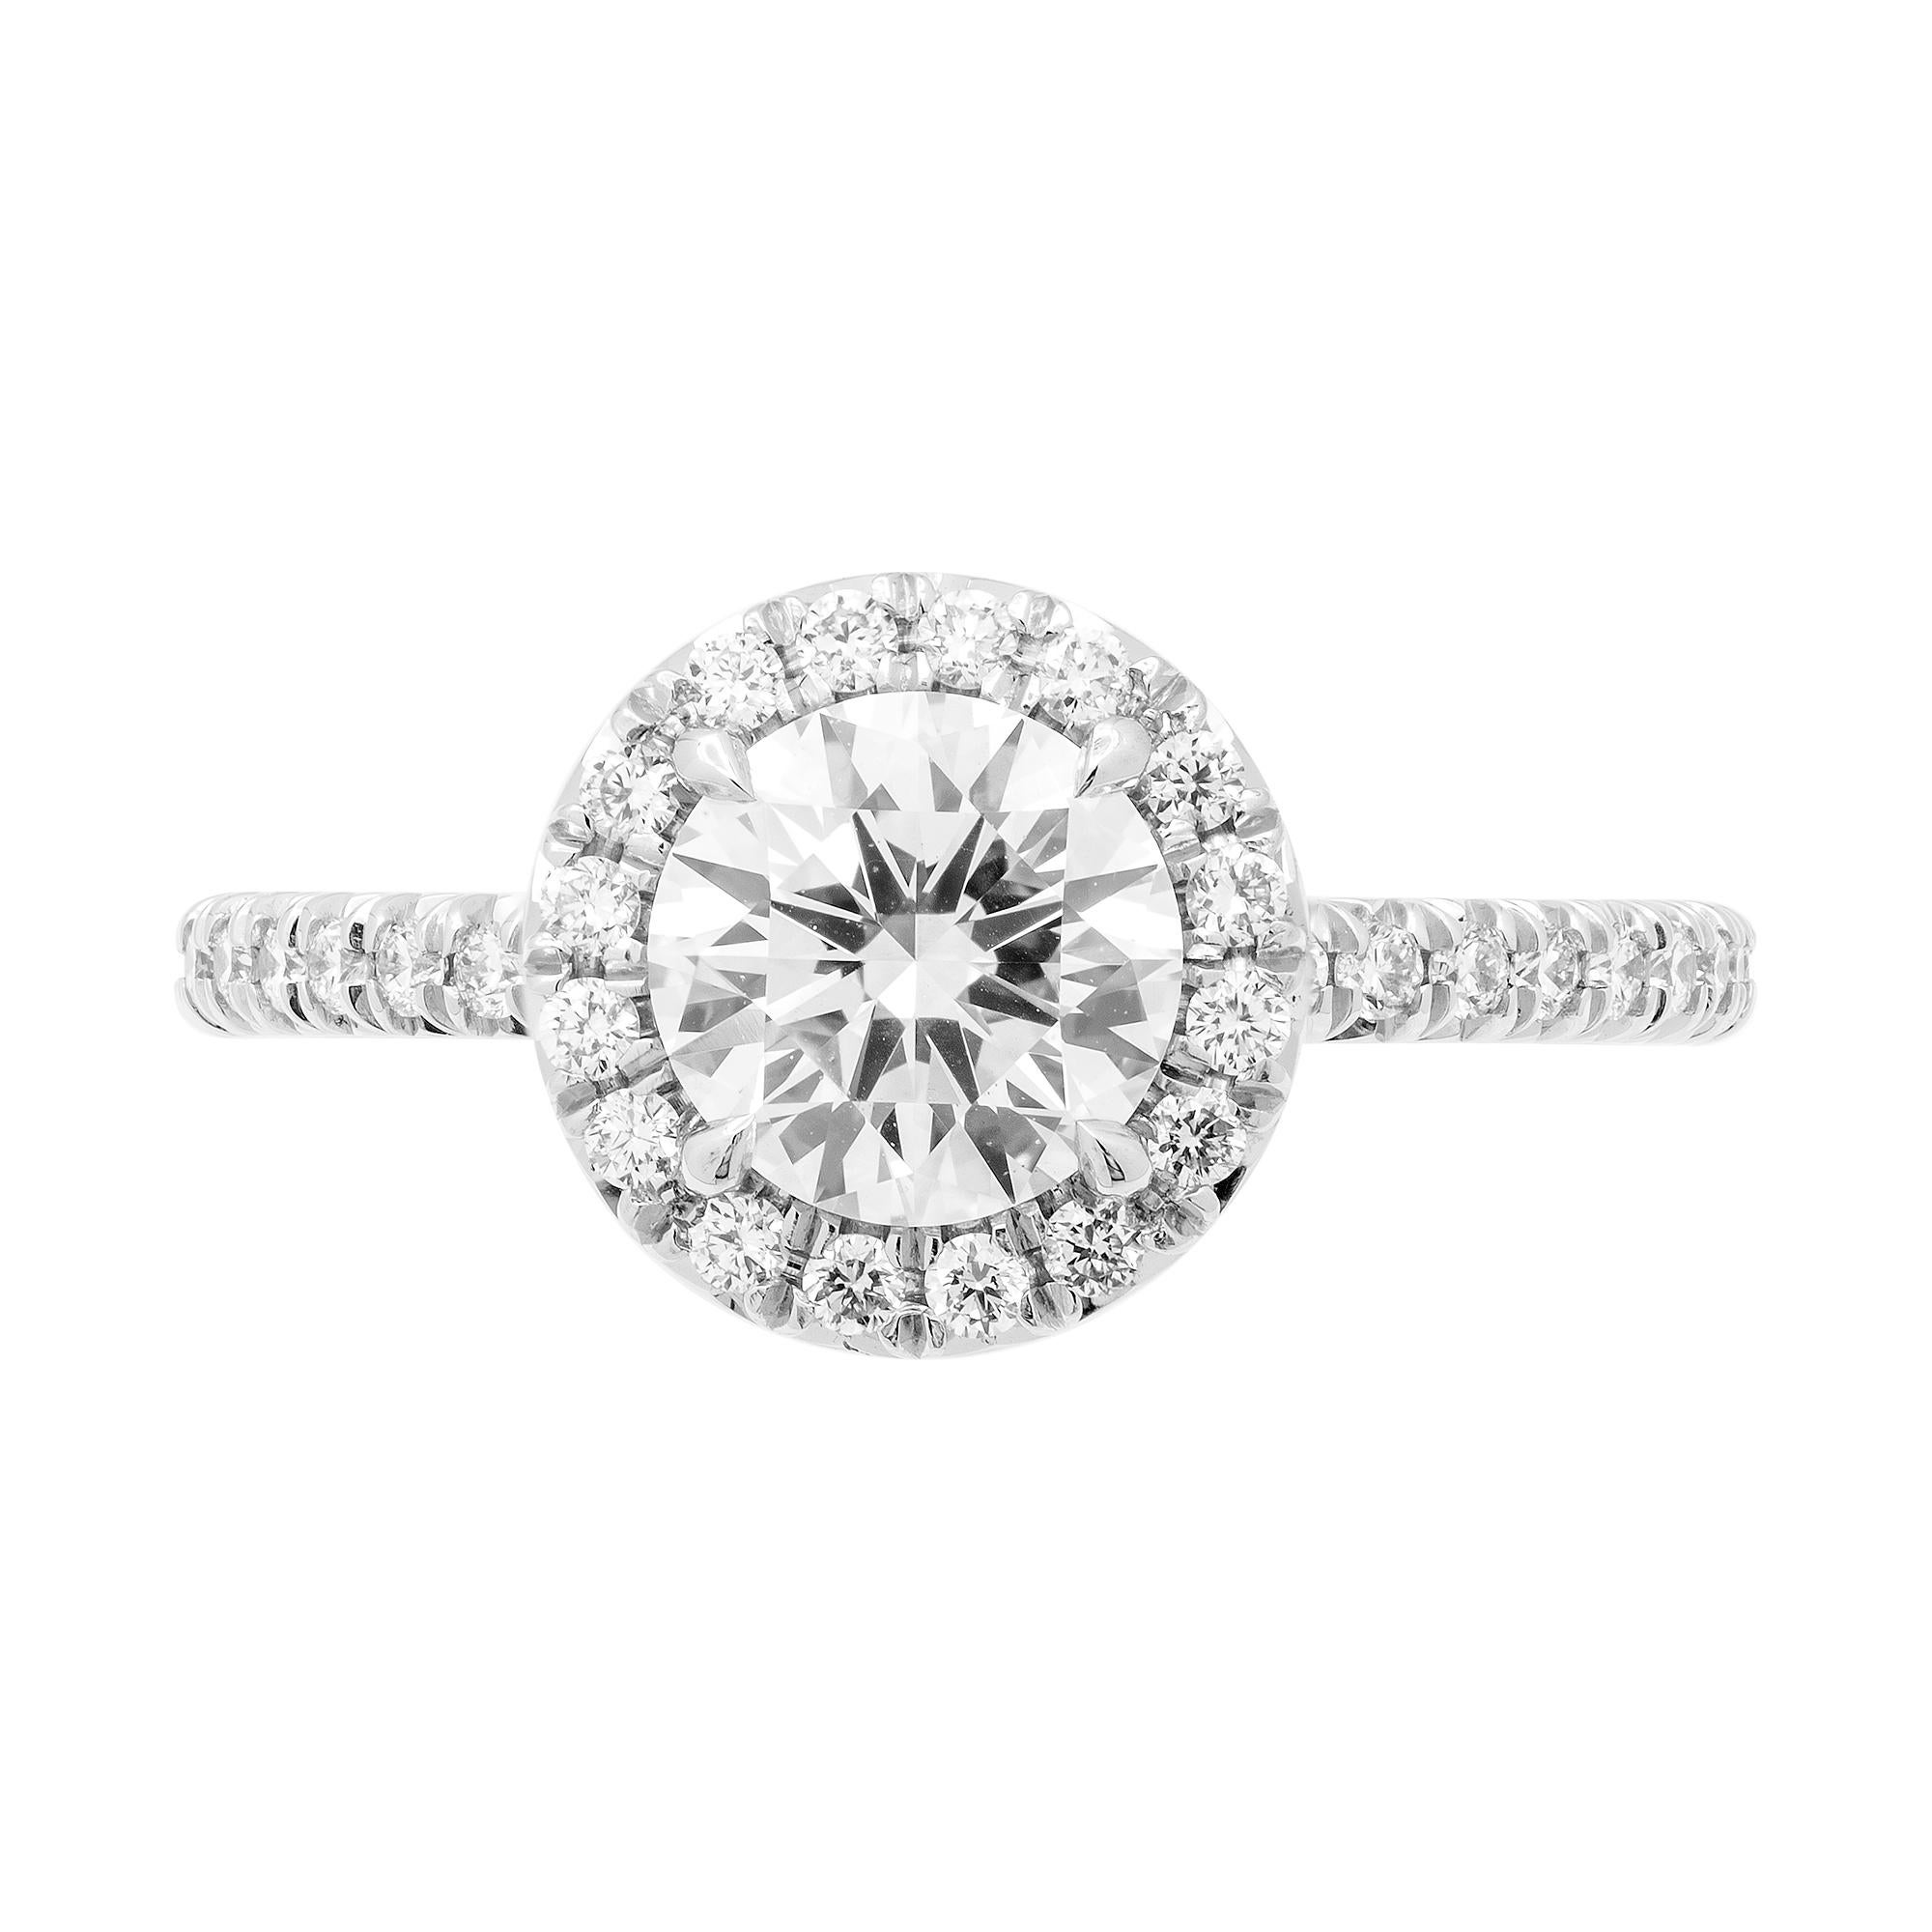 Mounted in handmade custom design setting featuring Platinum 950, diamond shank, that forms beautiful gallery under center stone, a true piece of art,
Halo around center stone makes it appear larger, looks like true 2 carat. Setting features